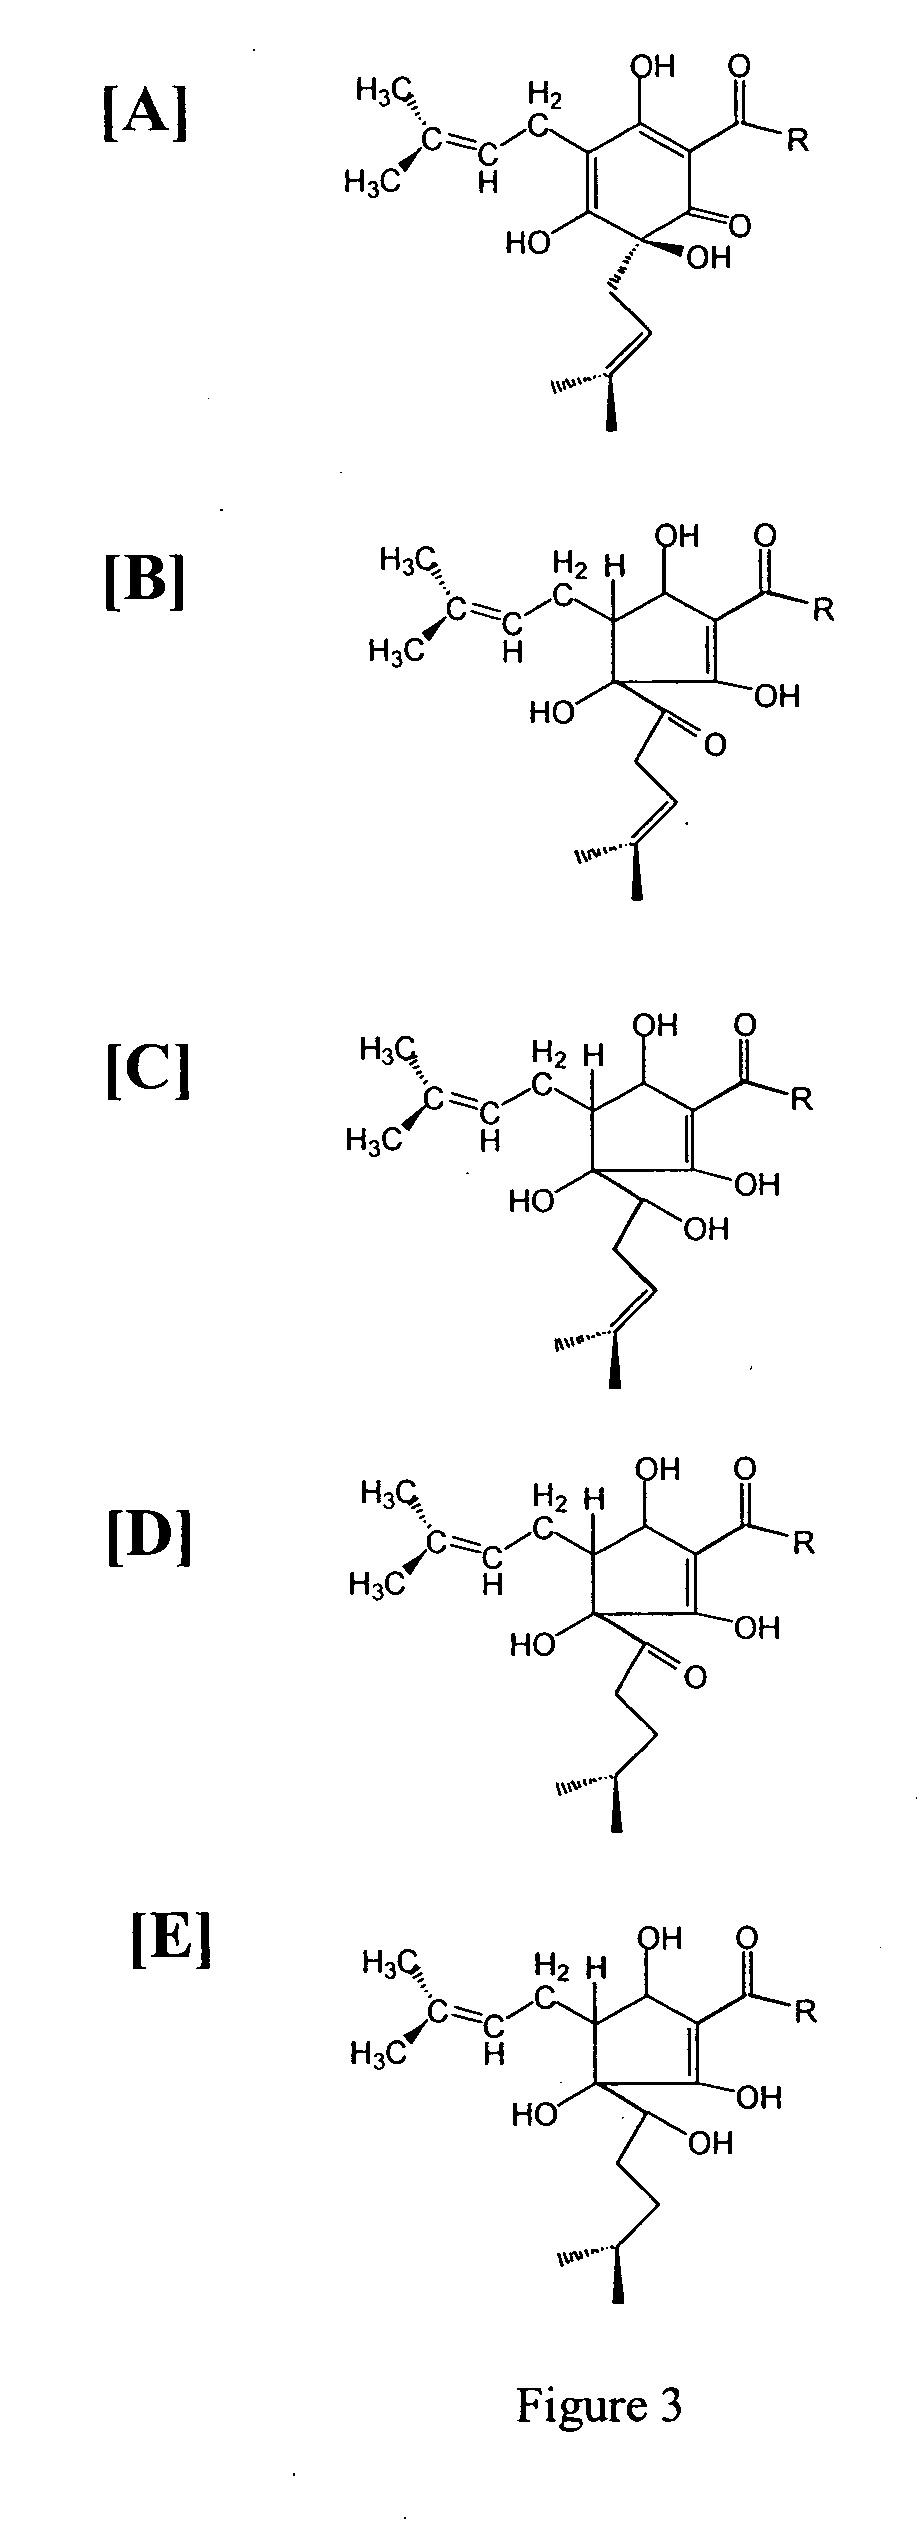 Anti-inflammatory pharmaceutical compositions for reducing inflammation and the treatment of prevention of gastric toxicity